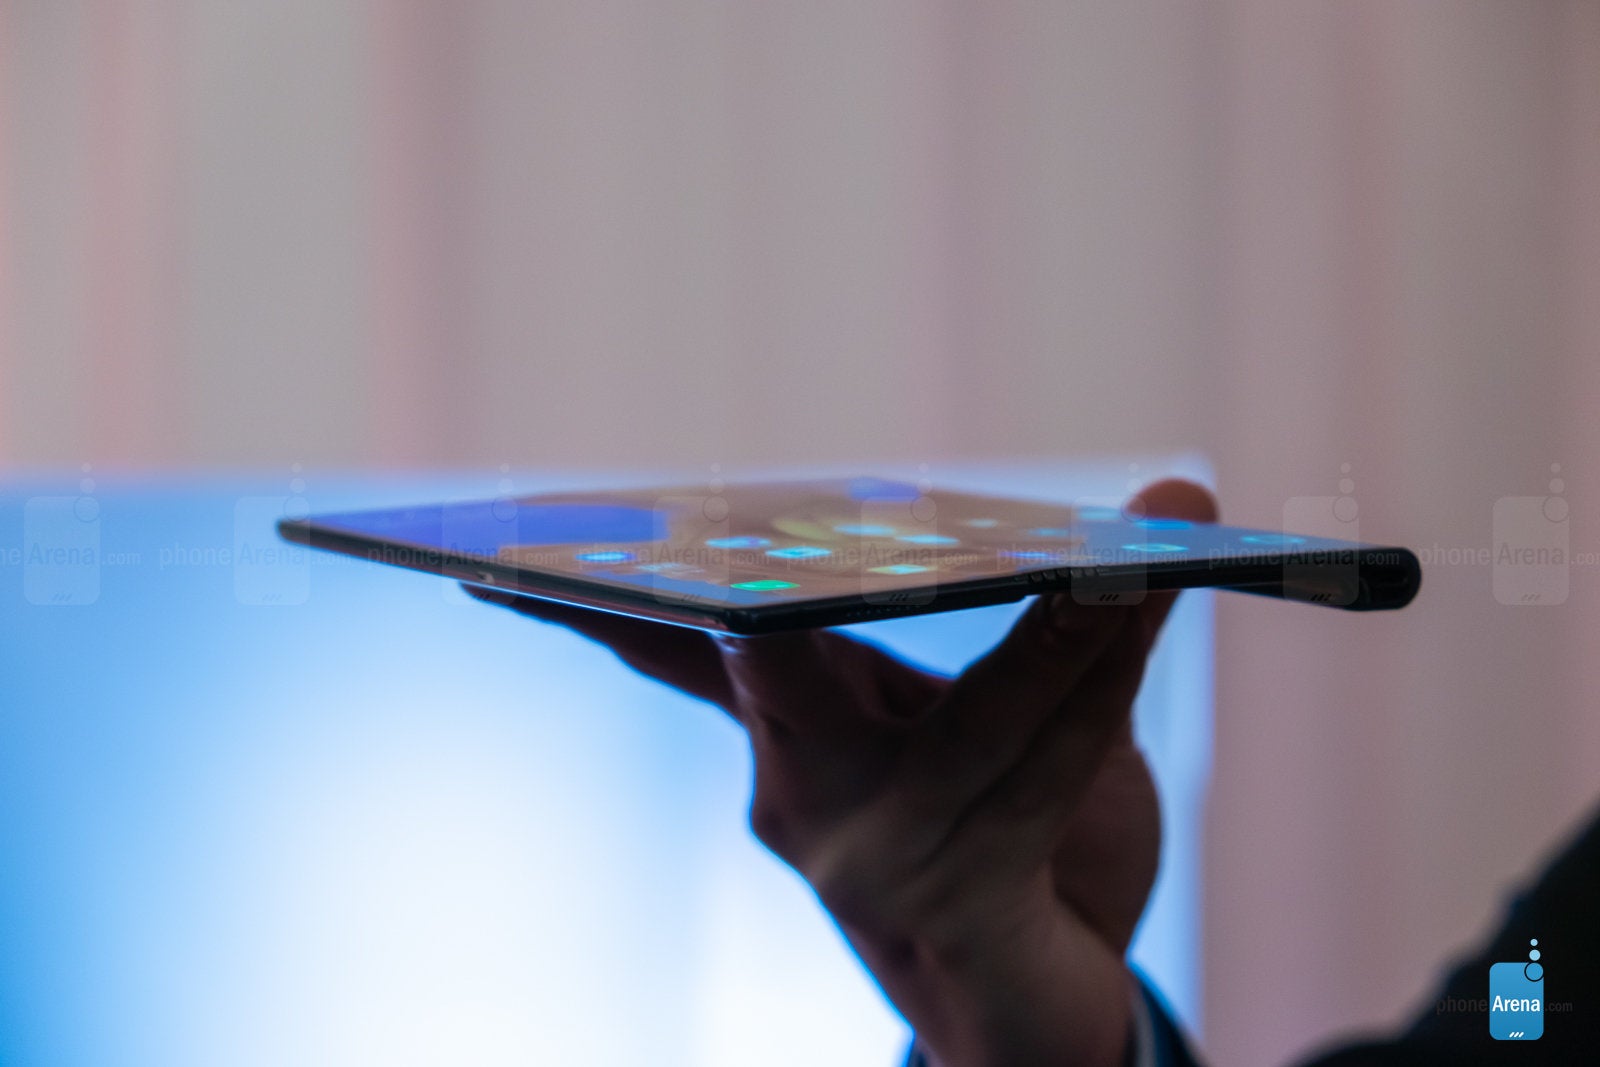 Huawei announces the foldable Mate X: it folds outwards!